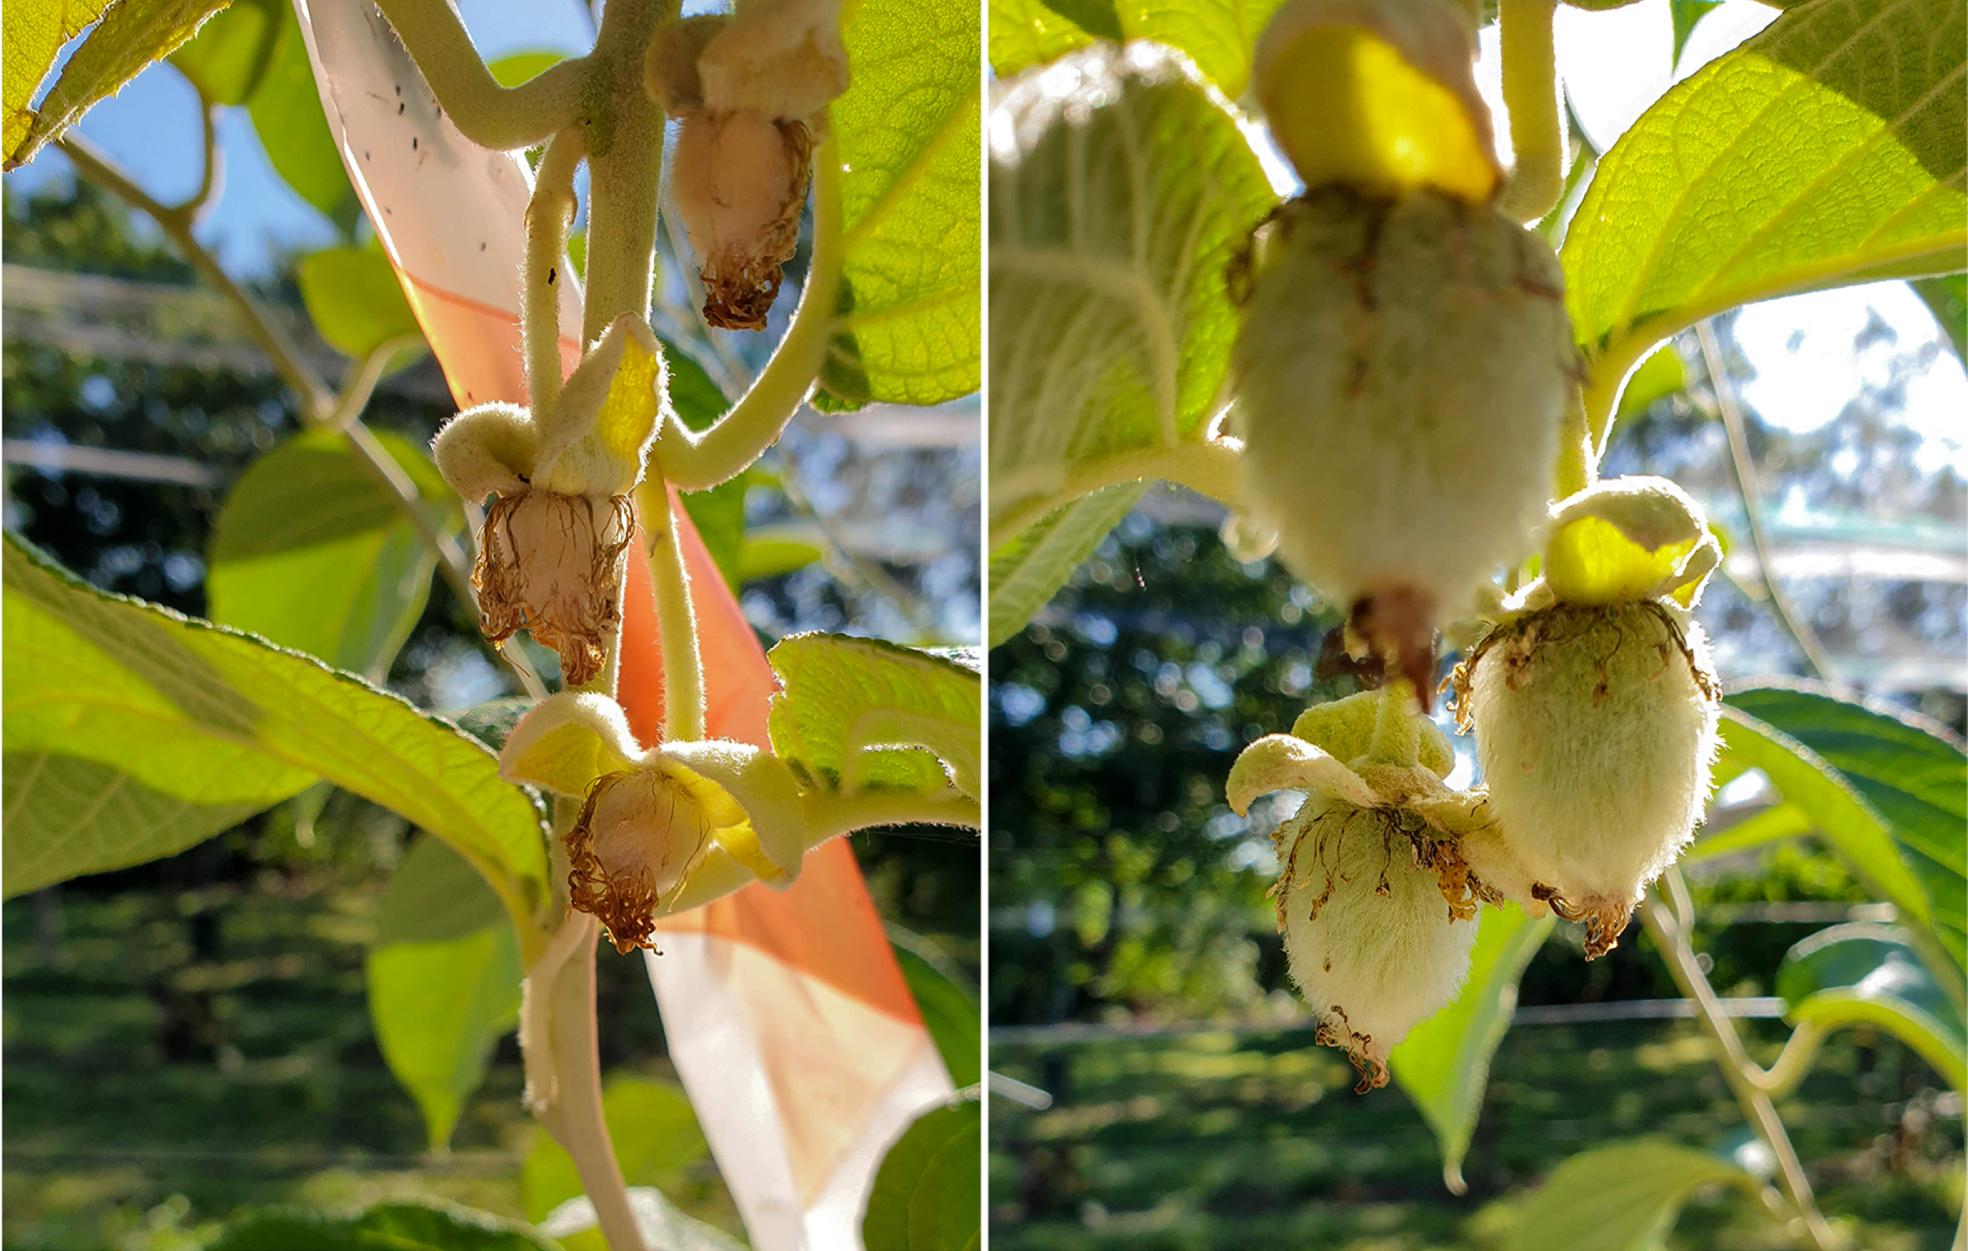 Pollen fertility controlled by FrBy gene. A comparison between A. eriantha selfed and open pollinated: fruit set failed after self-pollination of bag-isolated flowers on the left, while open-pollinated fruits are developing normally on the right. See text for details.